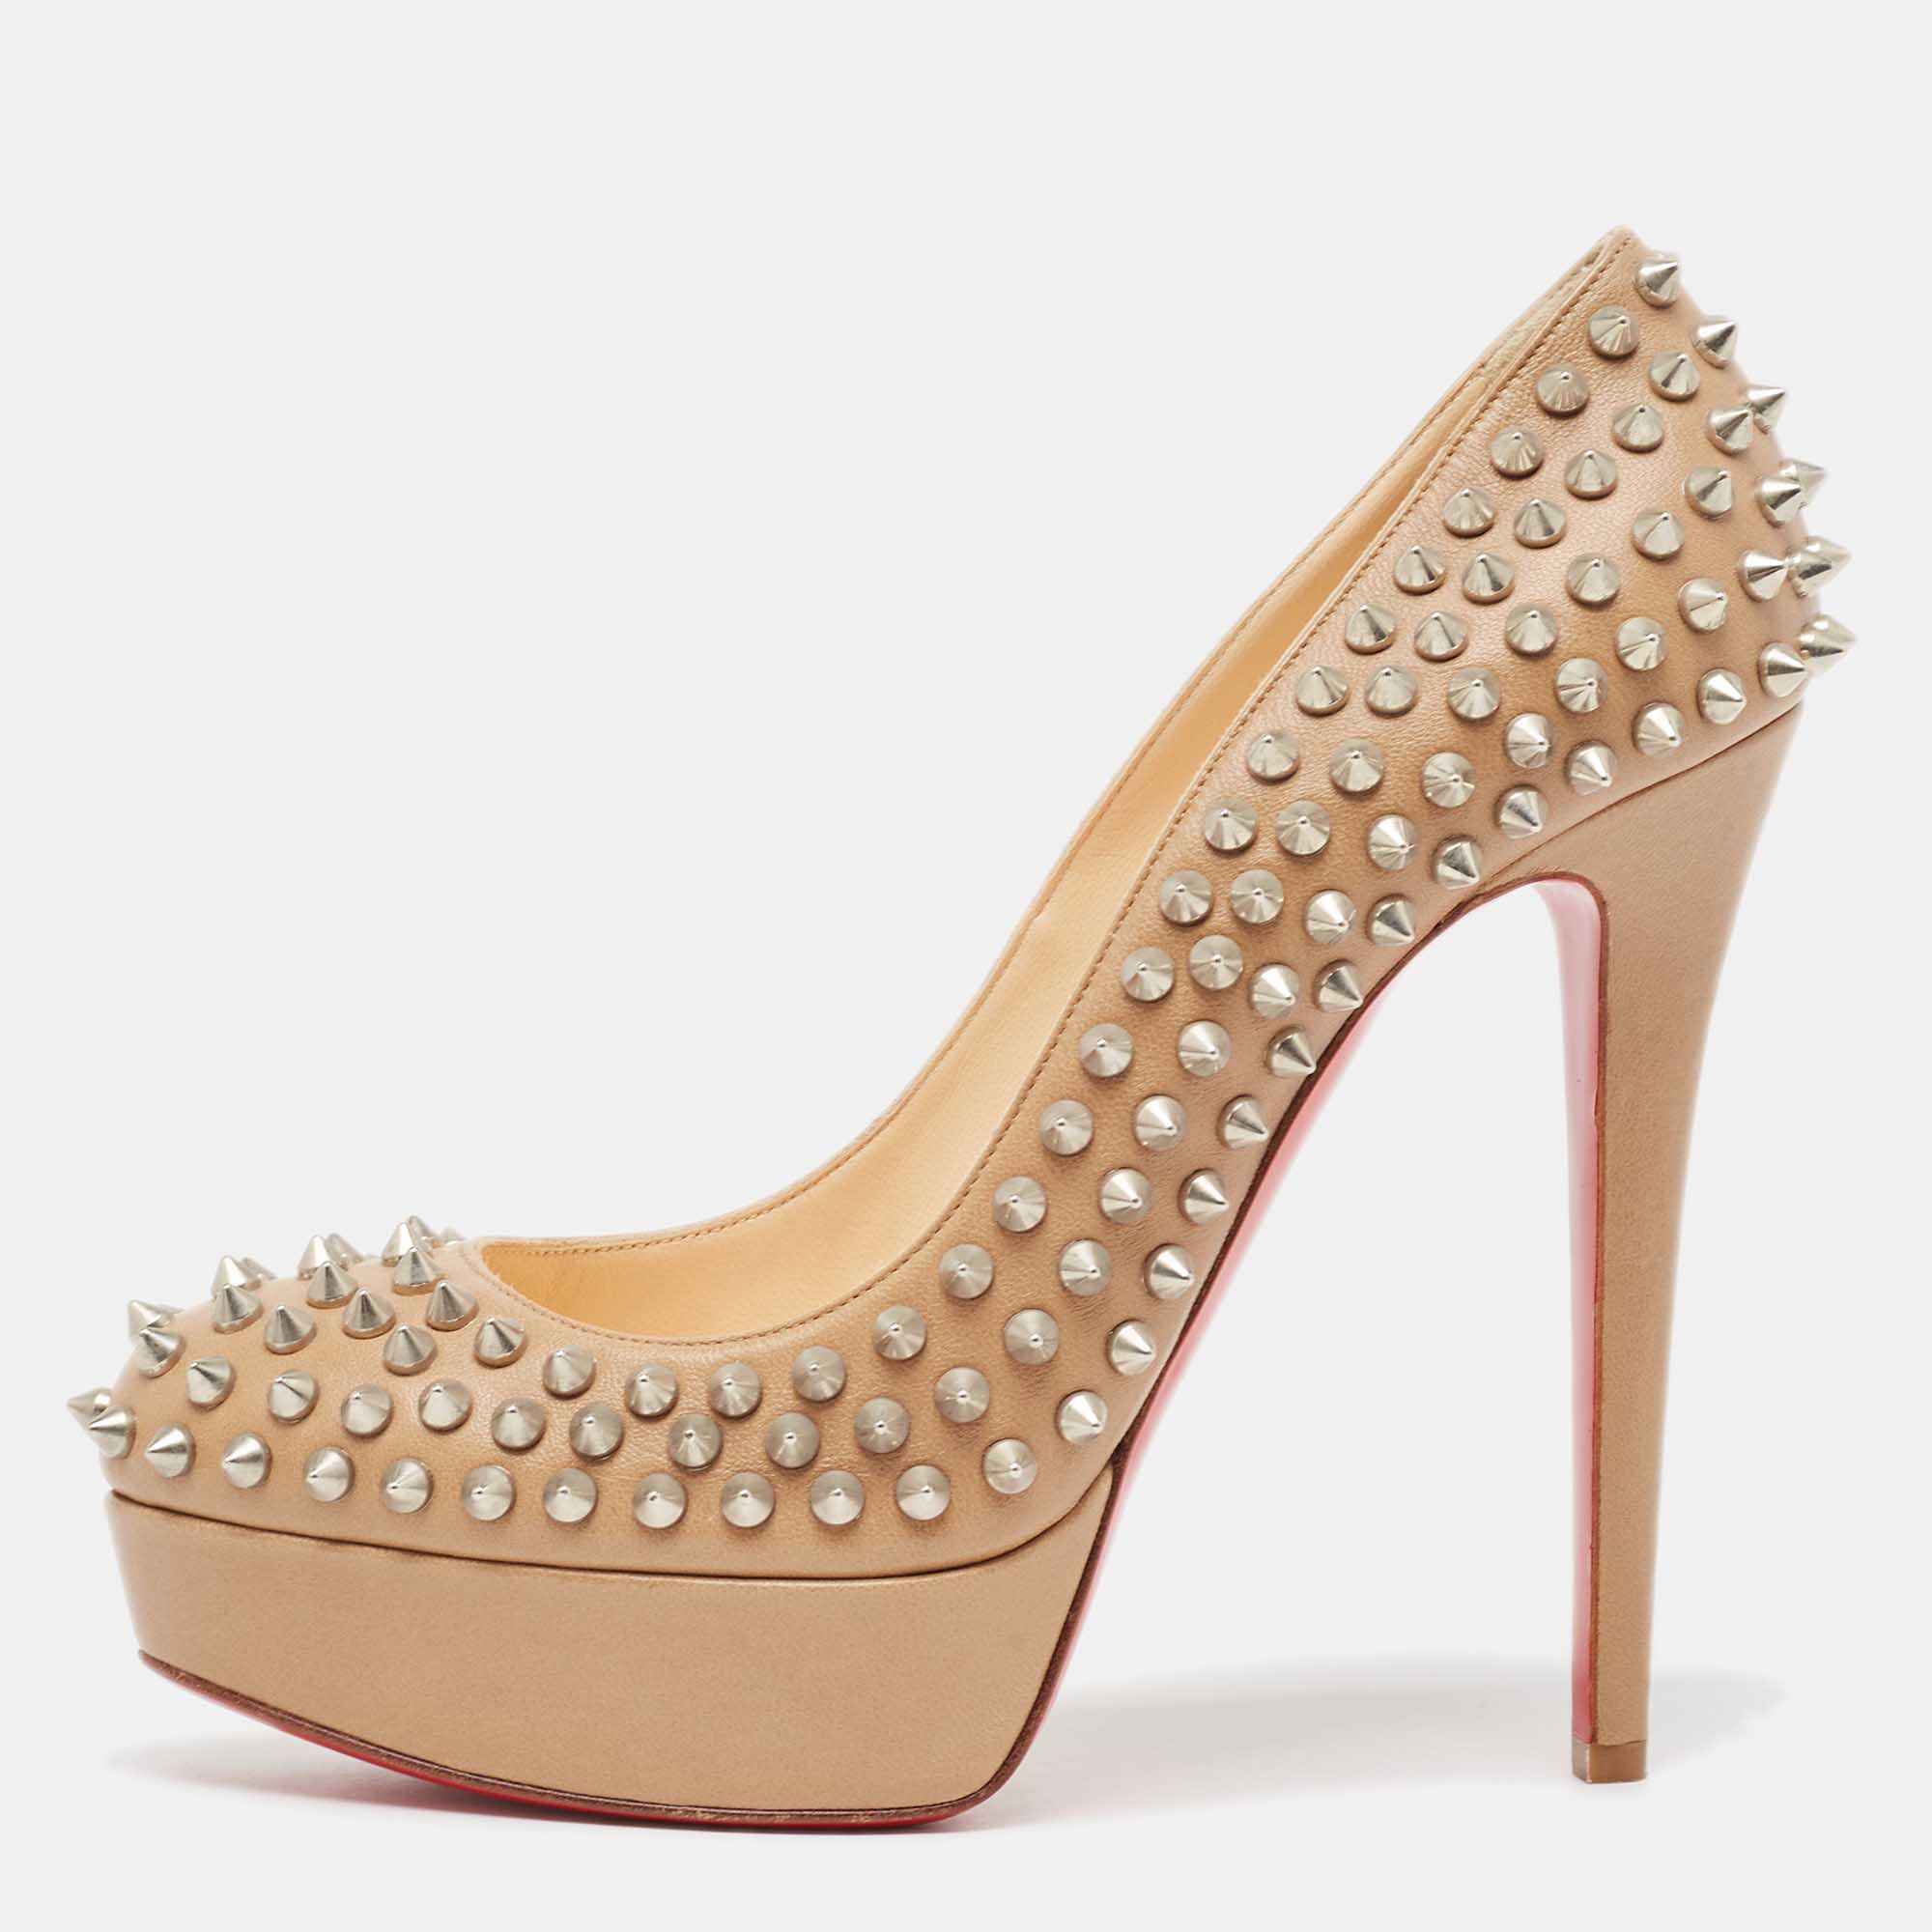 Christian louboutin brown leather spike pumps size 39